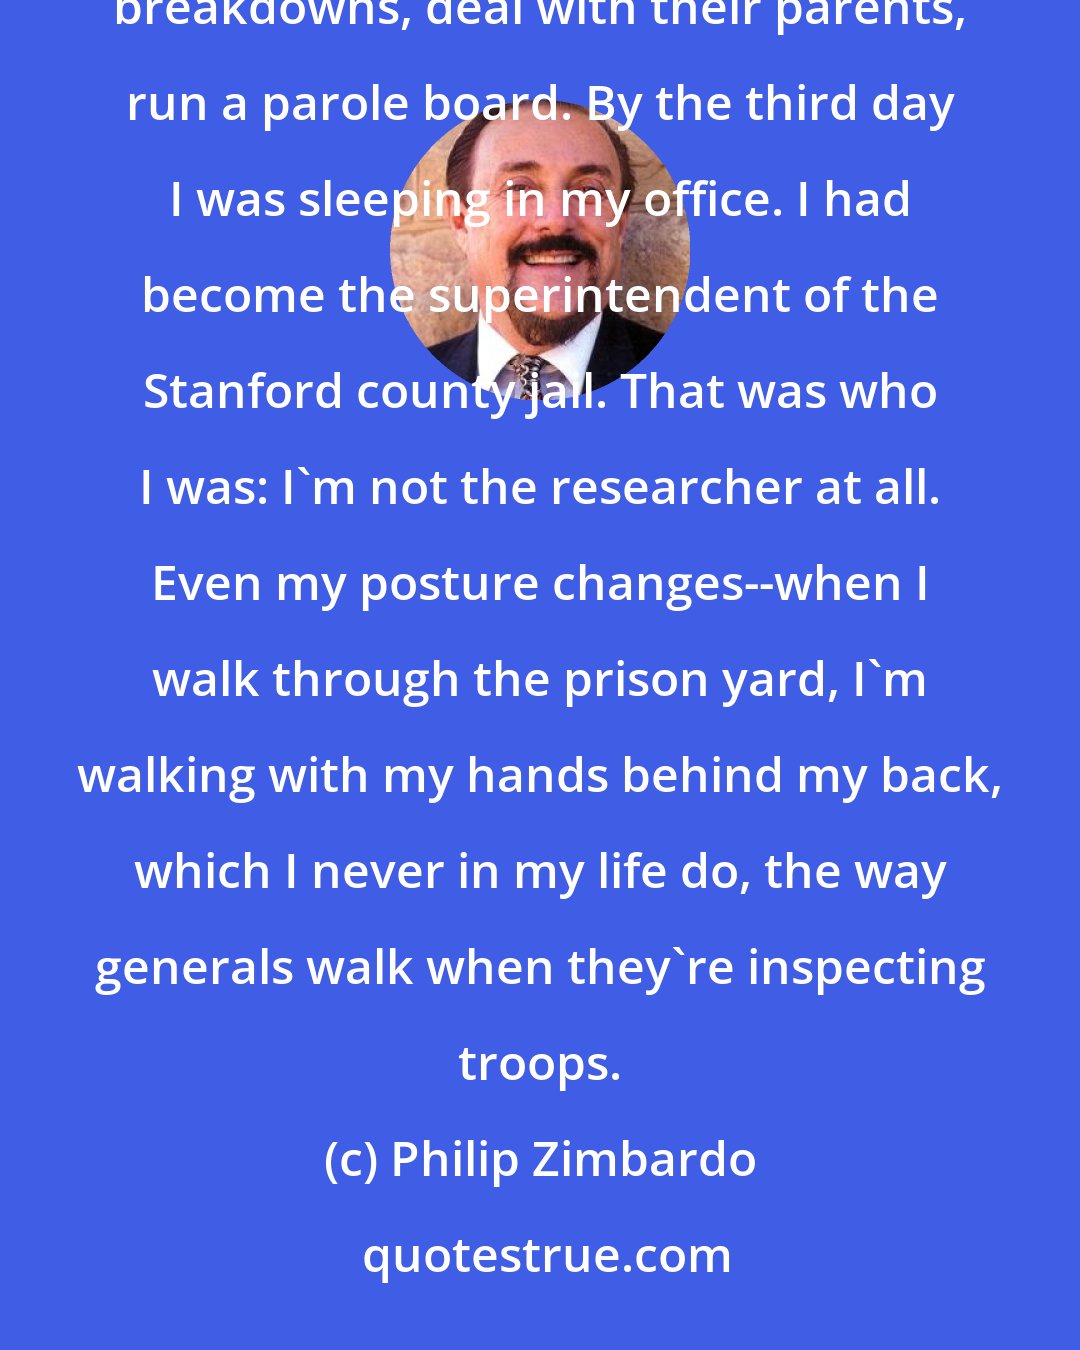 Philip Zimbardo: There was zero time for reflection. We had to feed the prisoners three meals a day, deal with the prisoner breakdowns, deal with their parents, run a parole board. By the third day I was sleeping in my office. I had become the superintendent of the Stanford county jail. That was who I was: I'm not the researcher at all. Even my posture changes--when I walk through the prison yard, I'm walking with my hands behind my back, which I never in my life do, the way generals walk when they're inspecting troops.